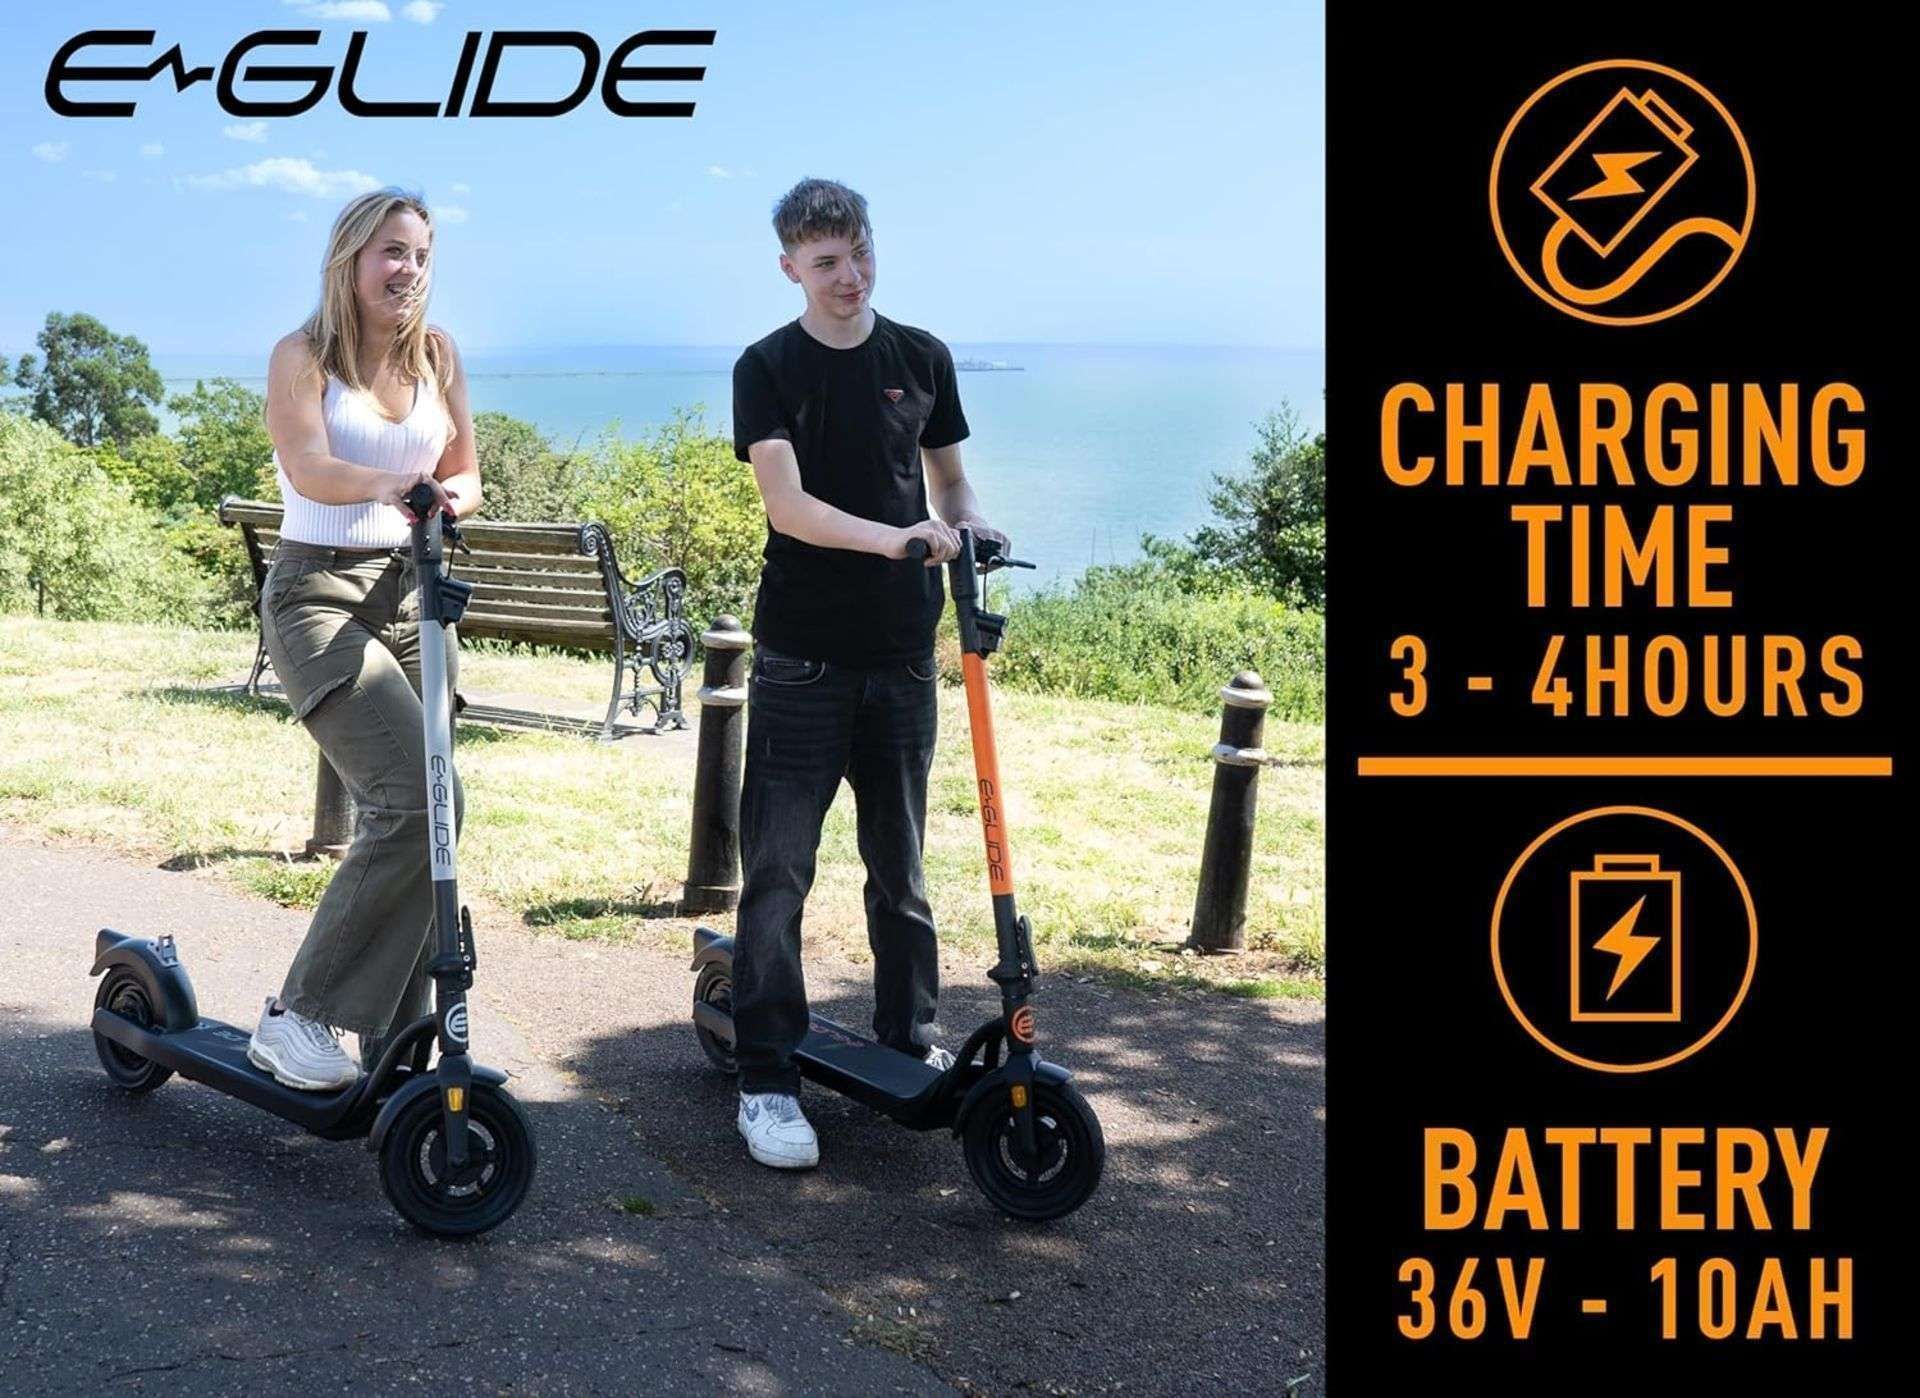 Trade Lot 4 x Brand New E-Glide V2 Electric Scooter Grey and Black RRP £599, Introducing a sleek and - Image 4 of 5